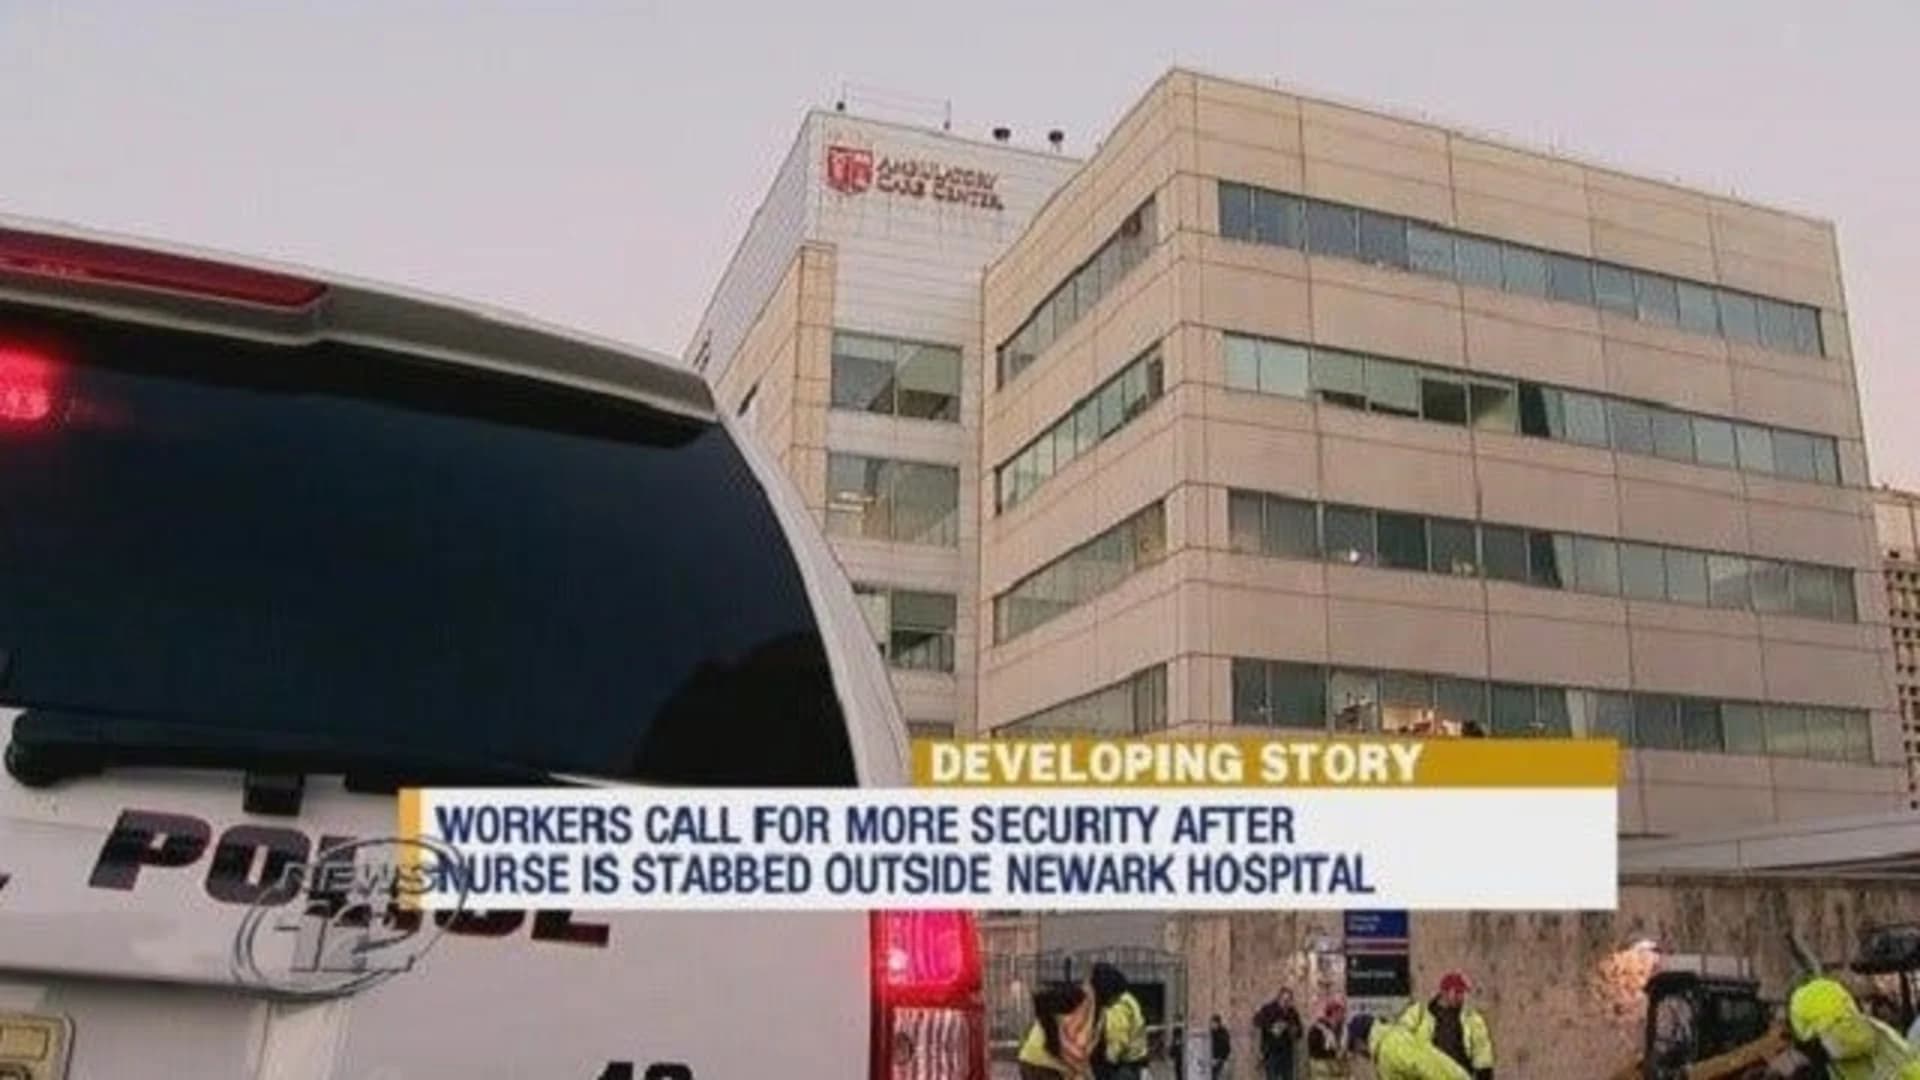 Newark hospital workers call for more security after nurse stabbed